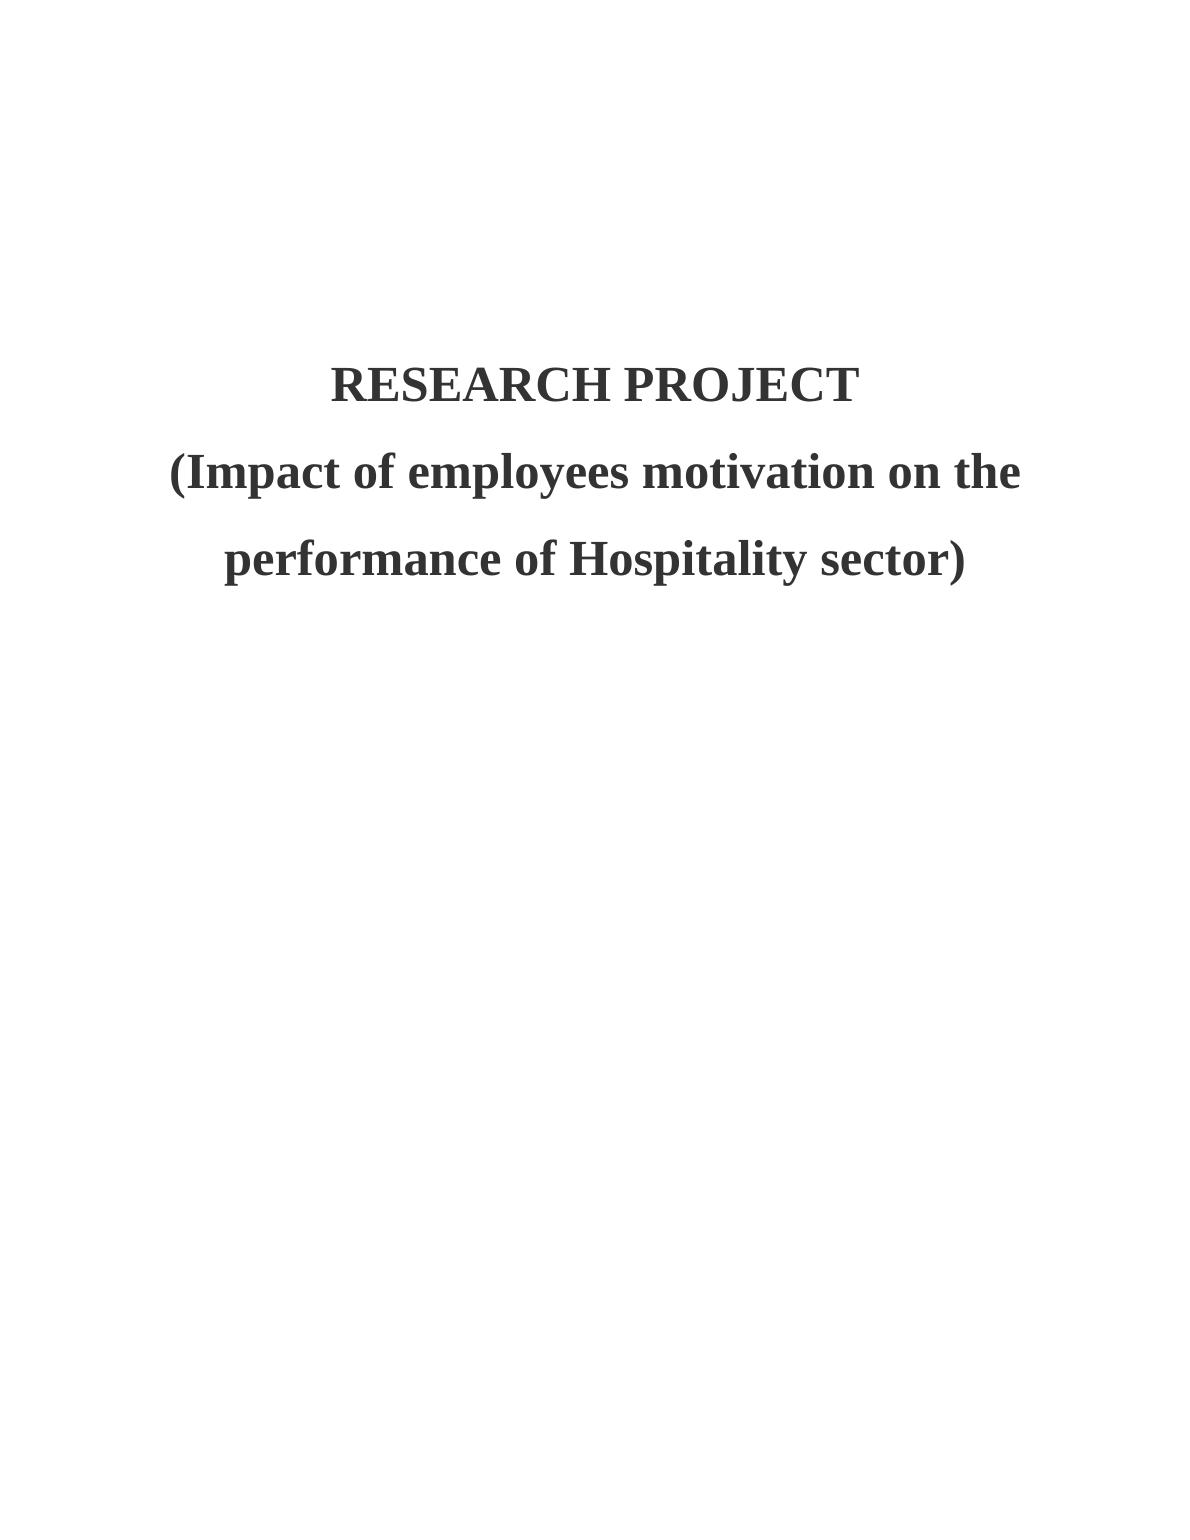 Influence of Employees Motivation on the Performance of Hospitality Sector_1